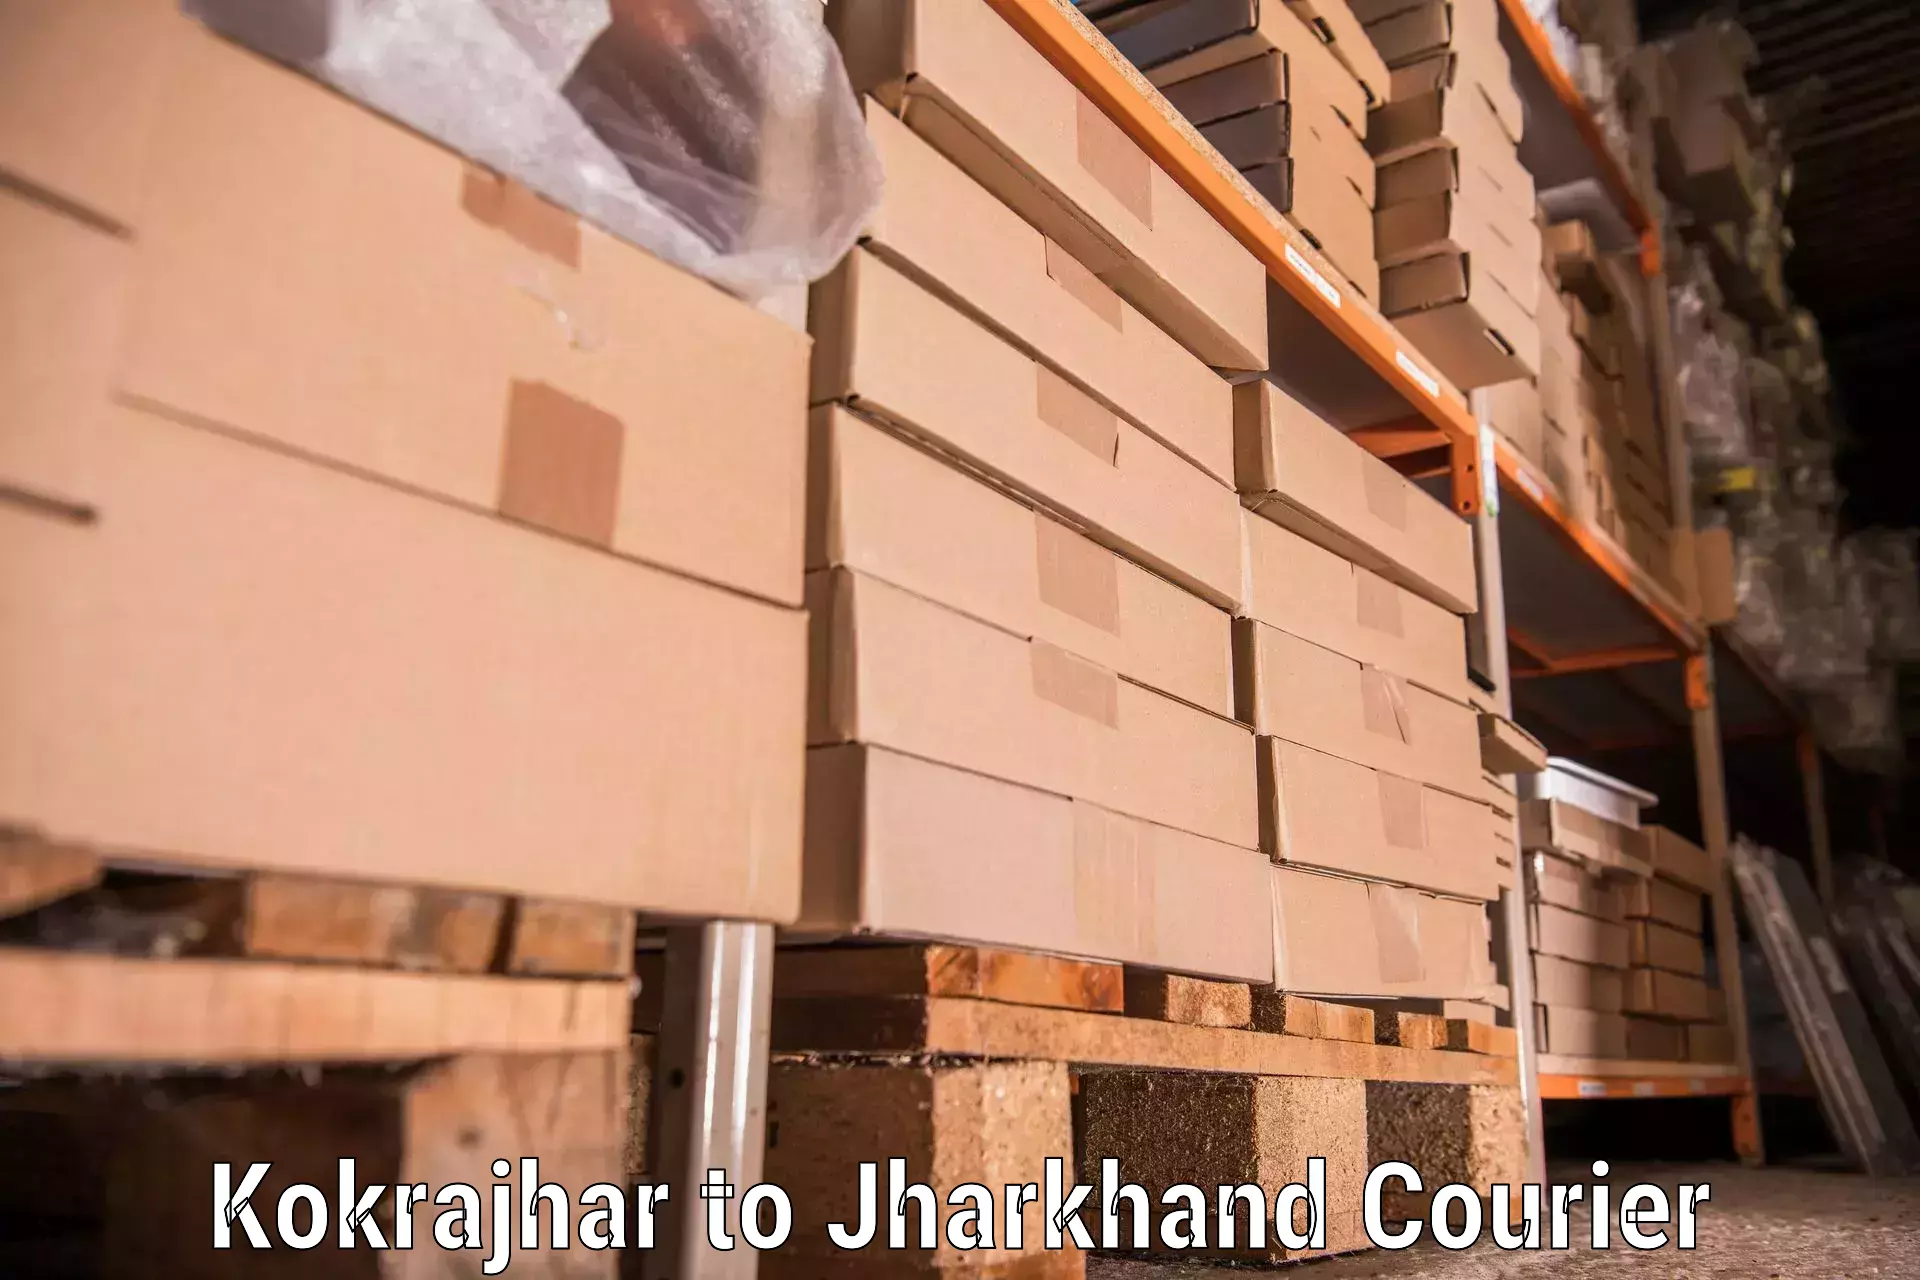 Moving and handling services in Kokrajhar to Dhanbad